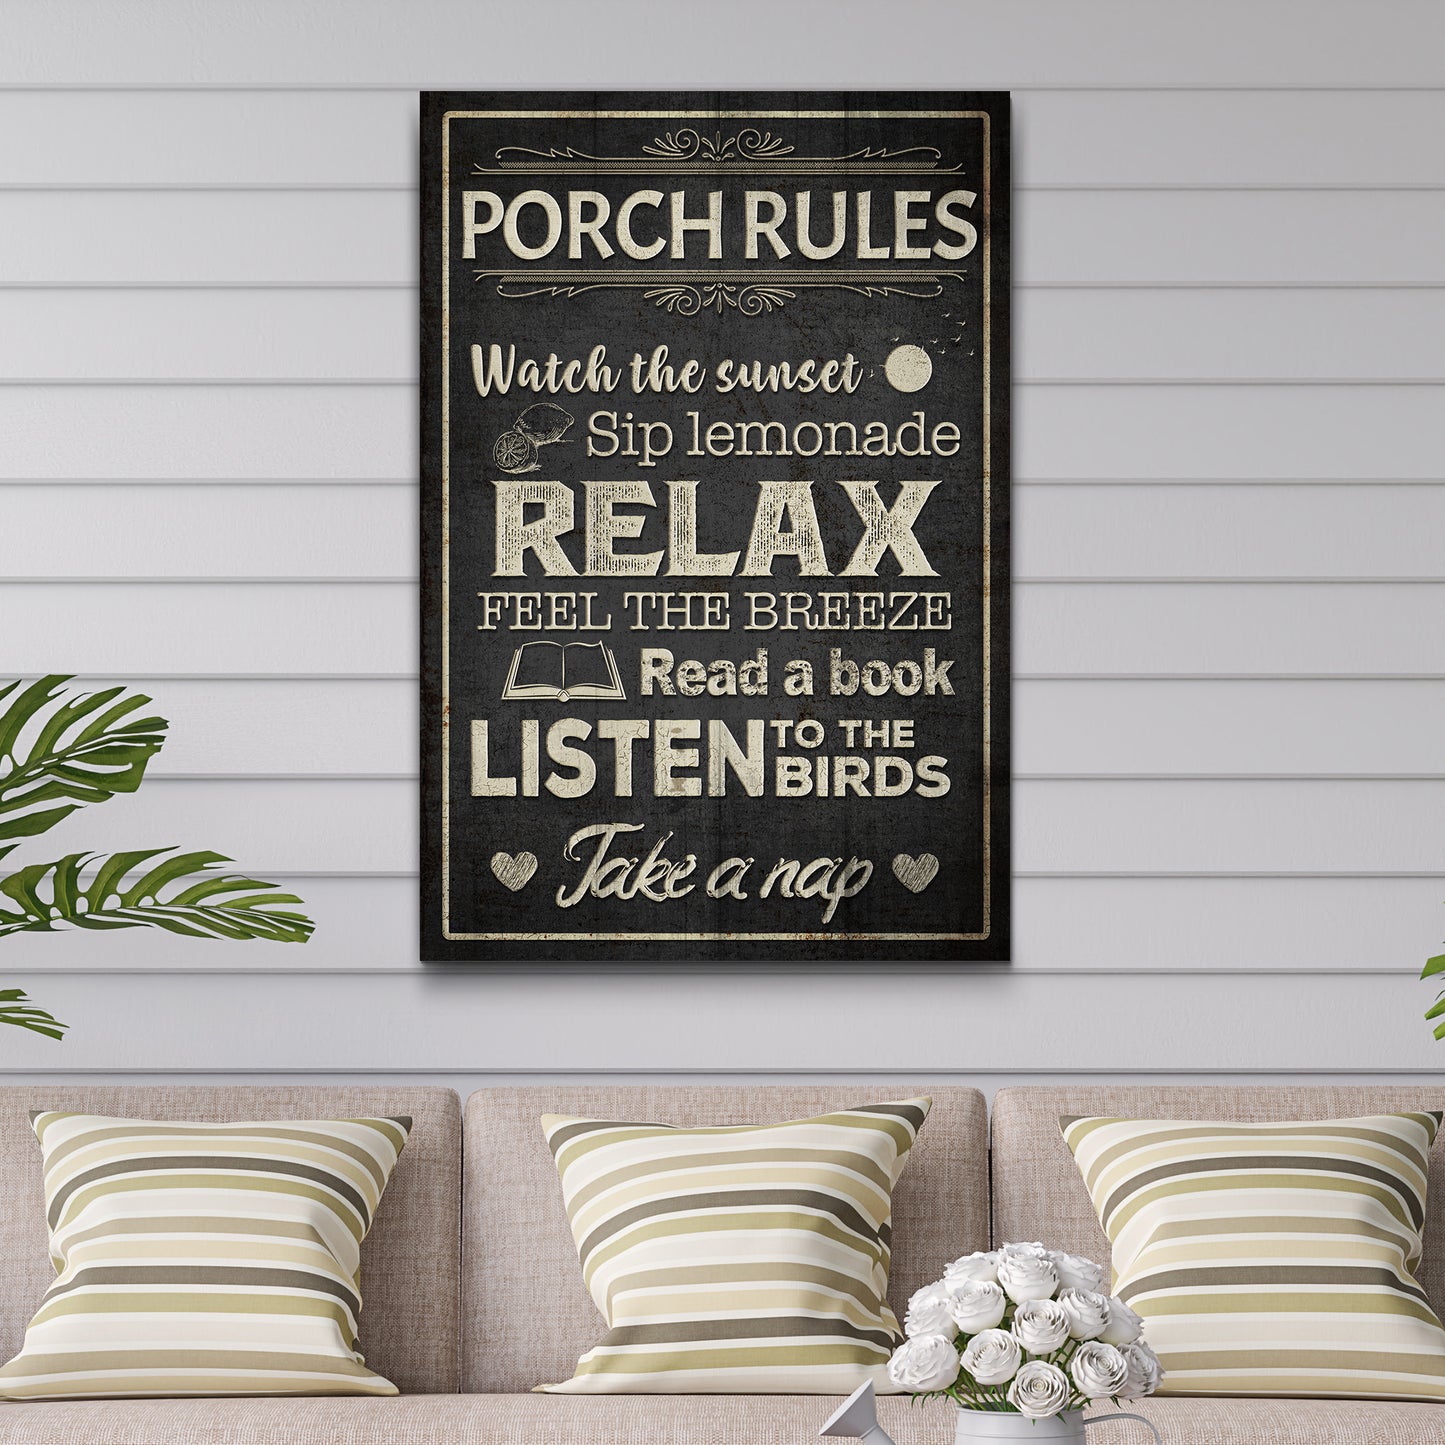 Porch Rules Sign III - Image by Tailored Canvases